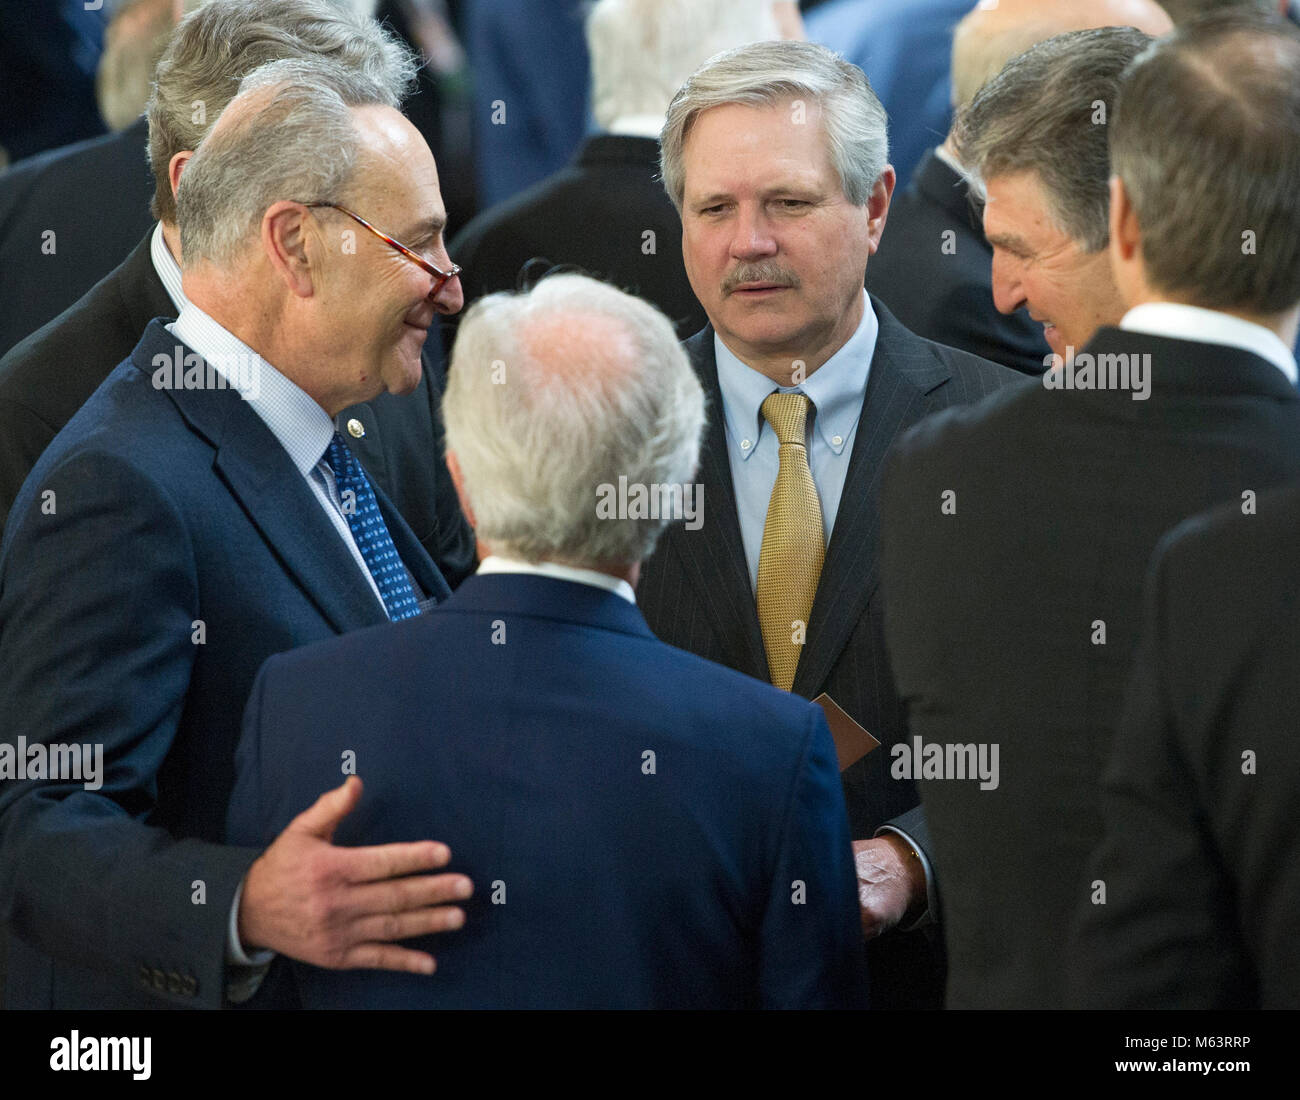 Washington, United States Of America. 28th Feb, 2018. United States Senate Minority Leader Chuck Schumer (Democrat of New York), left, speaks with US Senator John Hoeven (Republican of North Dakota), upper center, US Senator Joe Minchin (Democrat of West Virginia), right, and US Senator Bob Corker (Republican of Tennessee), lower center left, in the US Capitol Rotunda prior to the arrival ceremony preceding the lying in honor of the Reverend Billy Graham in Washington, DC on Wednesday, February 28, 2018. Credit: Ron Sachs/Pool via CNP Photo via Credit: Newscom/Alamy Live News Stock Photo